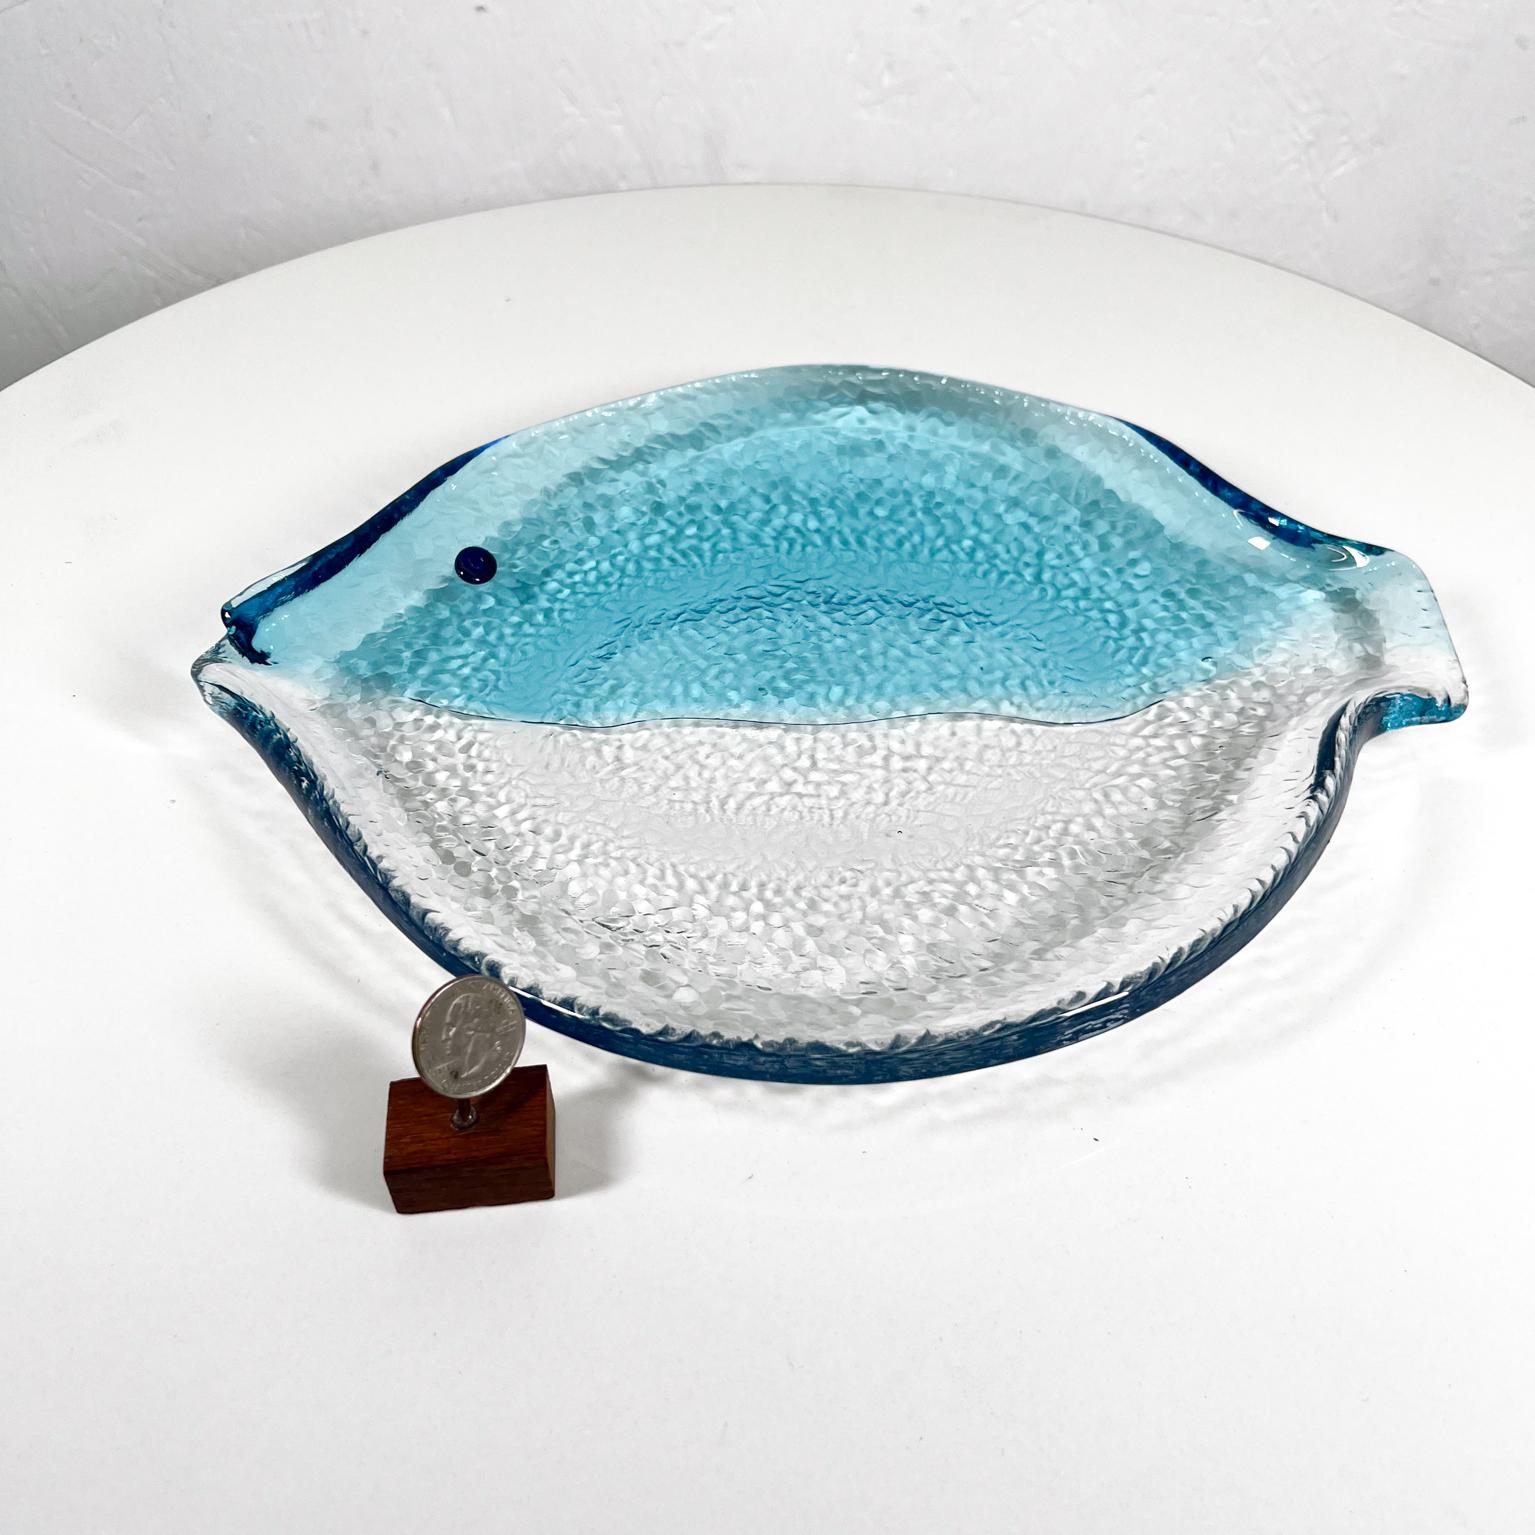 Modern Fish Art Textured Blue Glass Serving Plate 
12.38 W x 10 D x 1.75 H.
Preowned vintage condition
See all images.